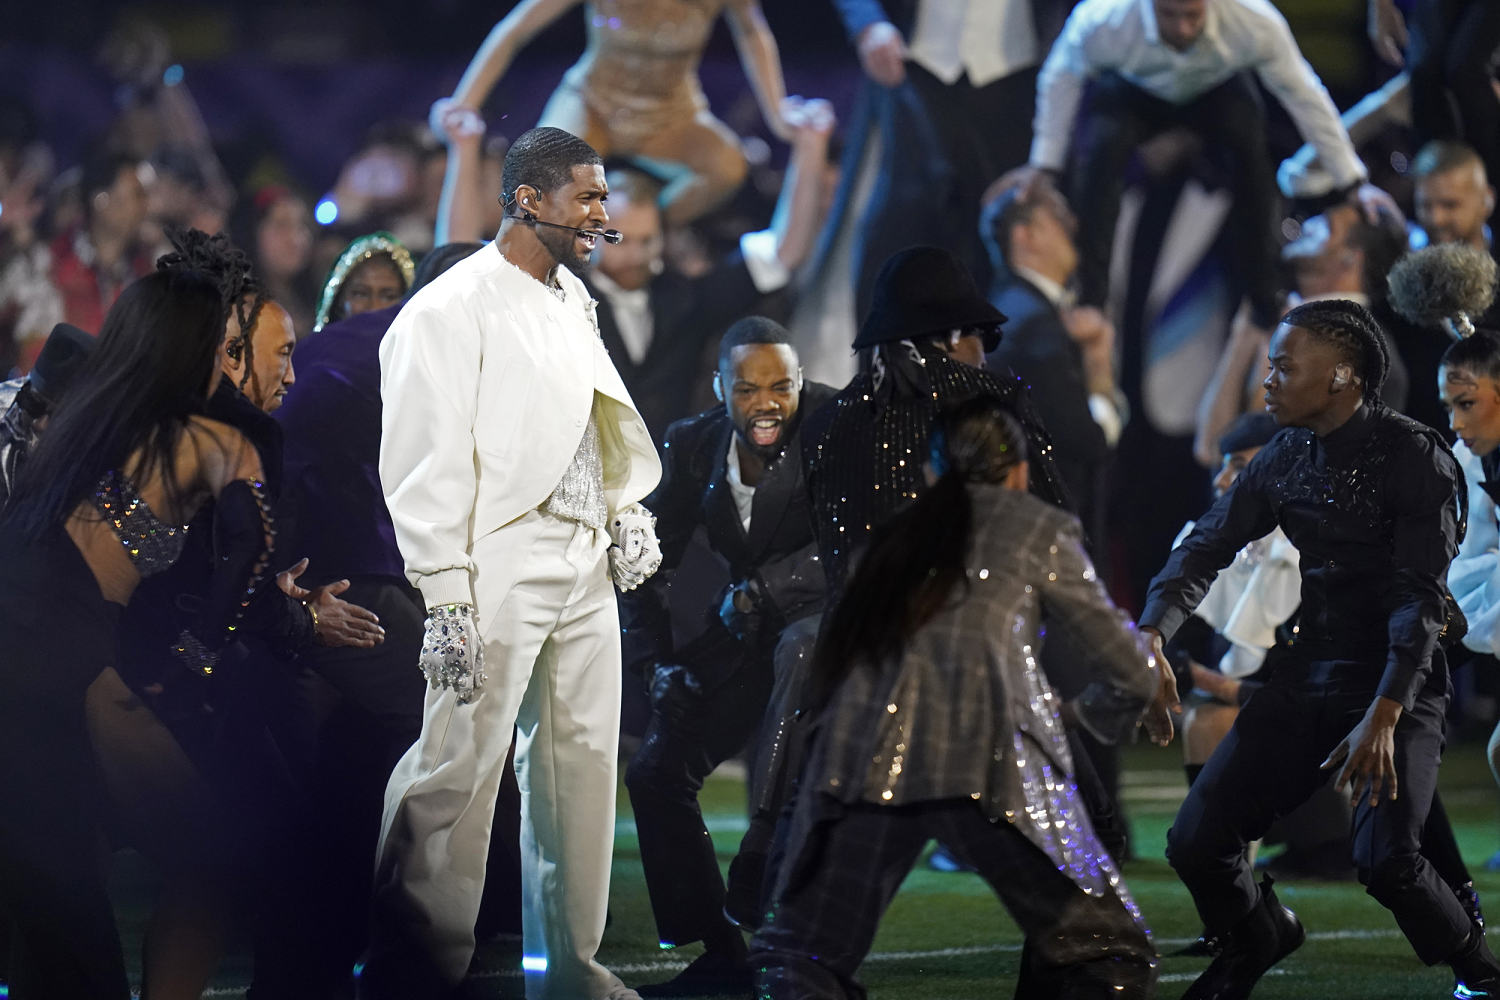 Usher joined by Alicia Keys, Lil Jon, Ludacris and more during Super Bowl LVIII halftime show